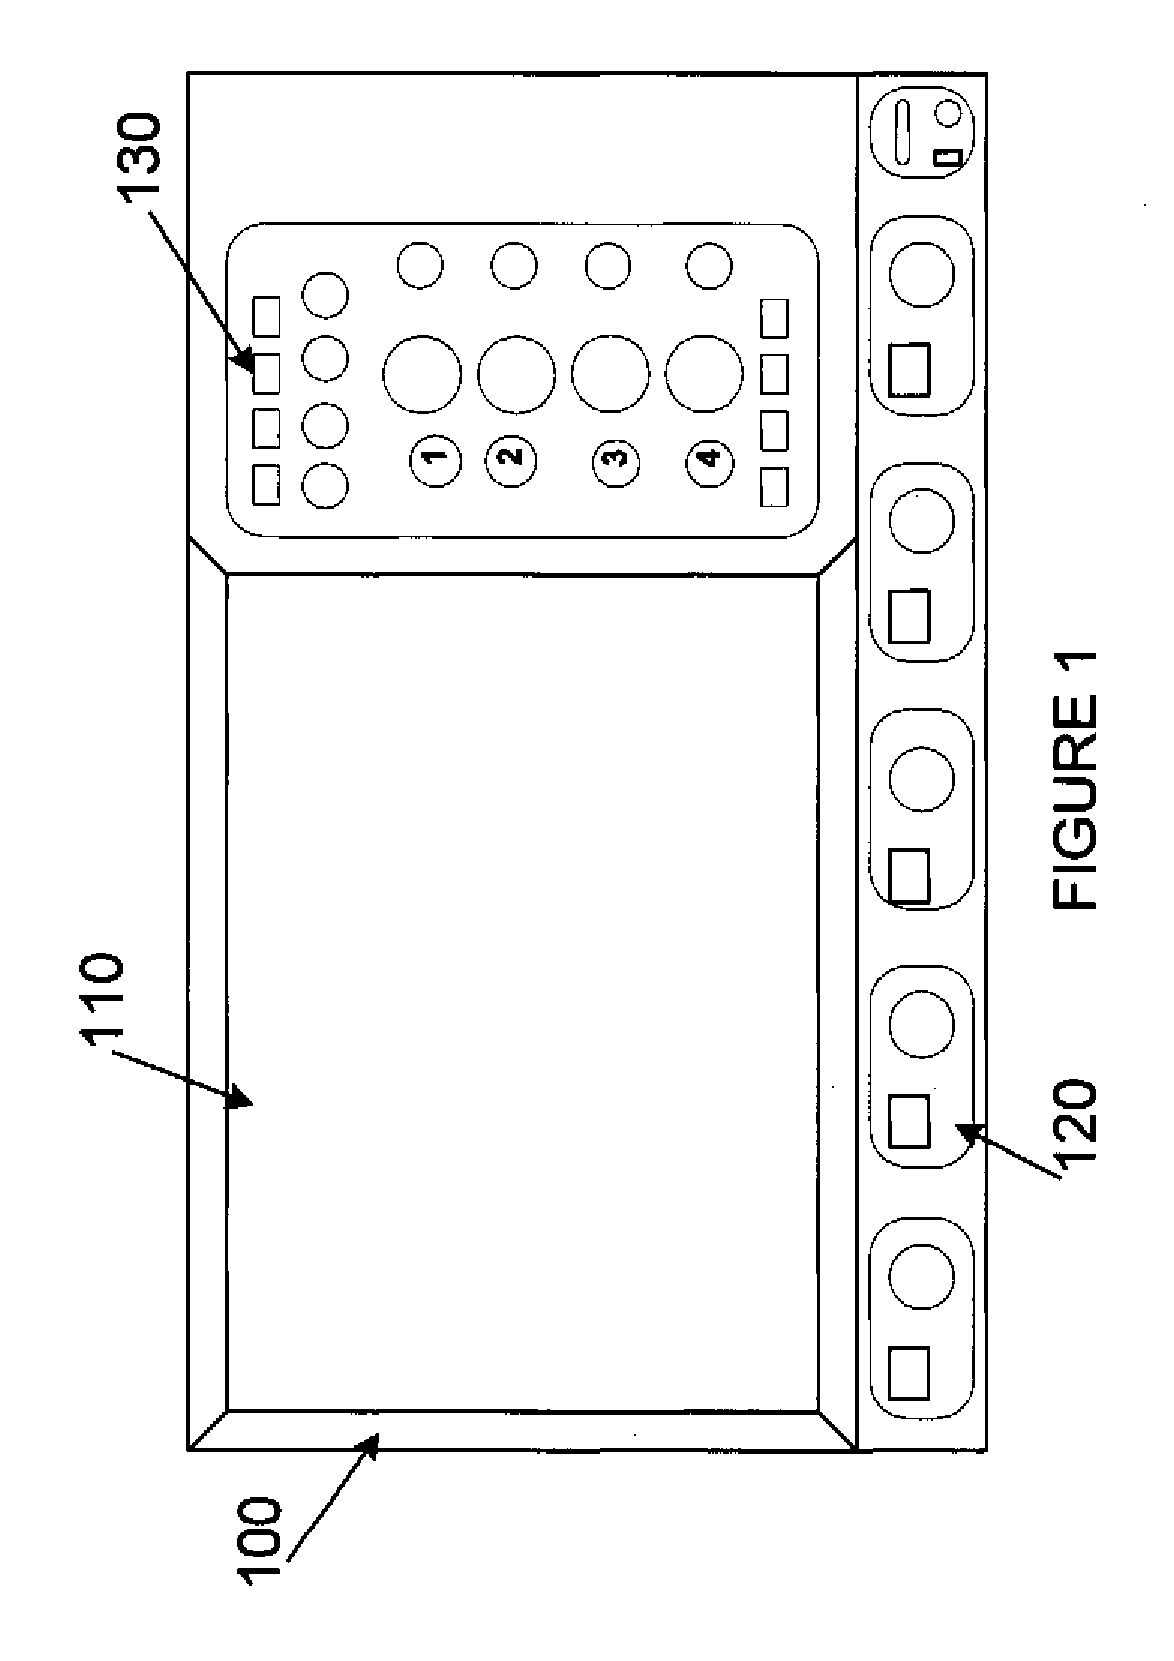 Remote Display and Control for Test and Measurement Apparatus